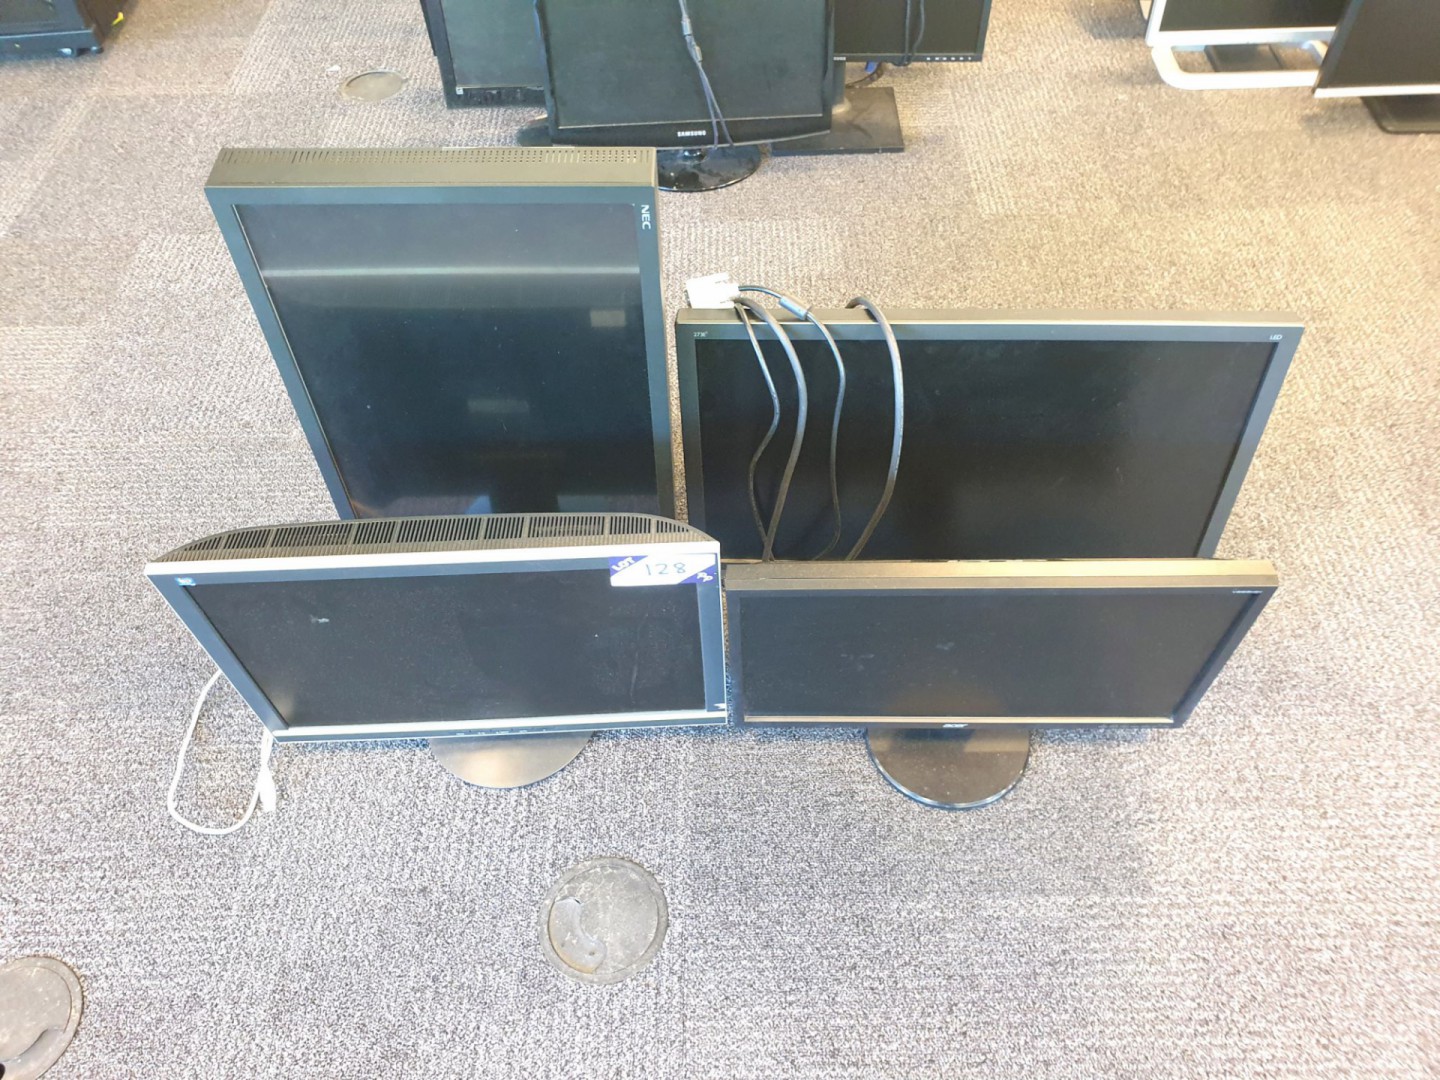 4x various NEC, Acer LCD monitors to 26"